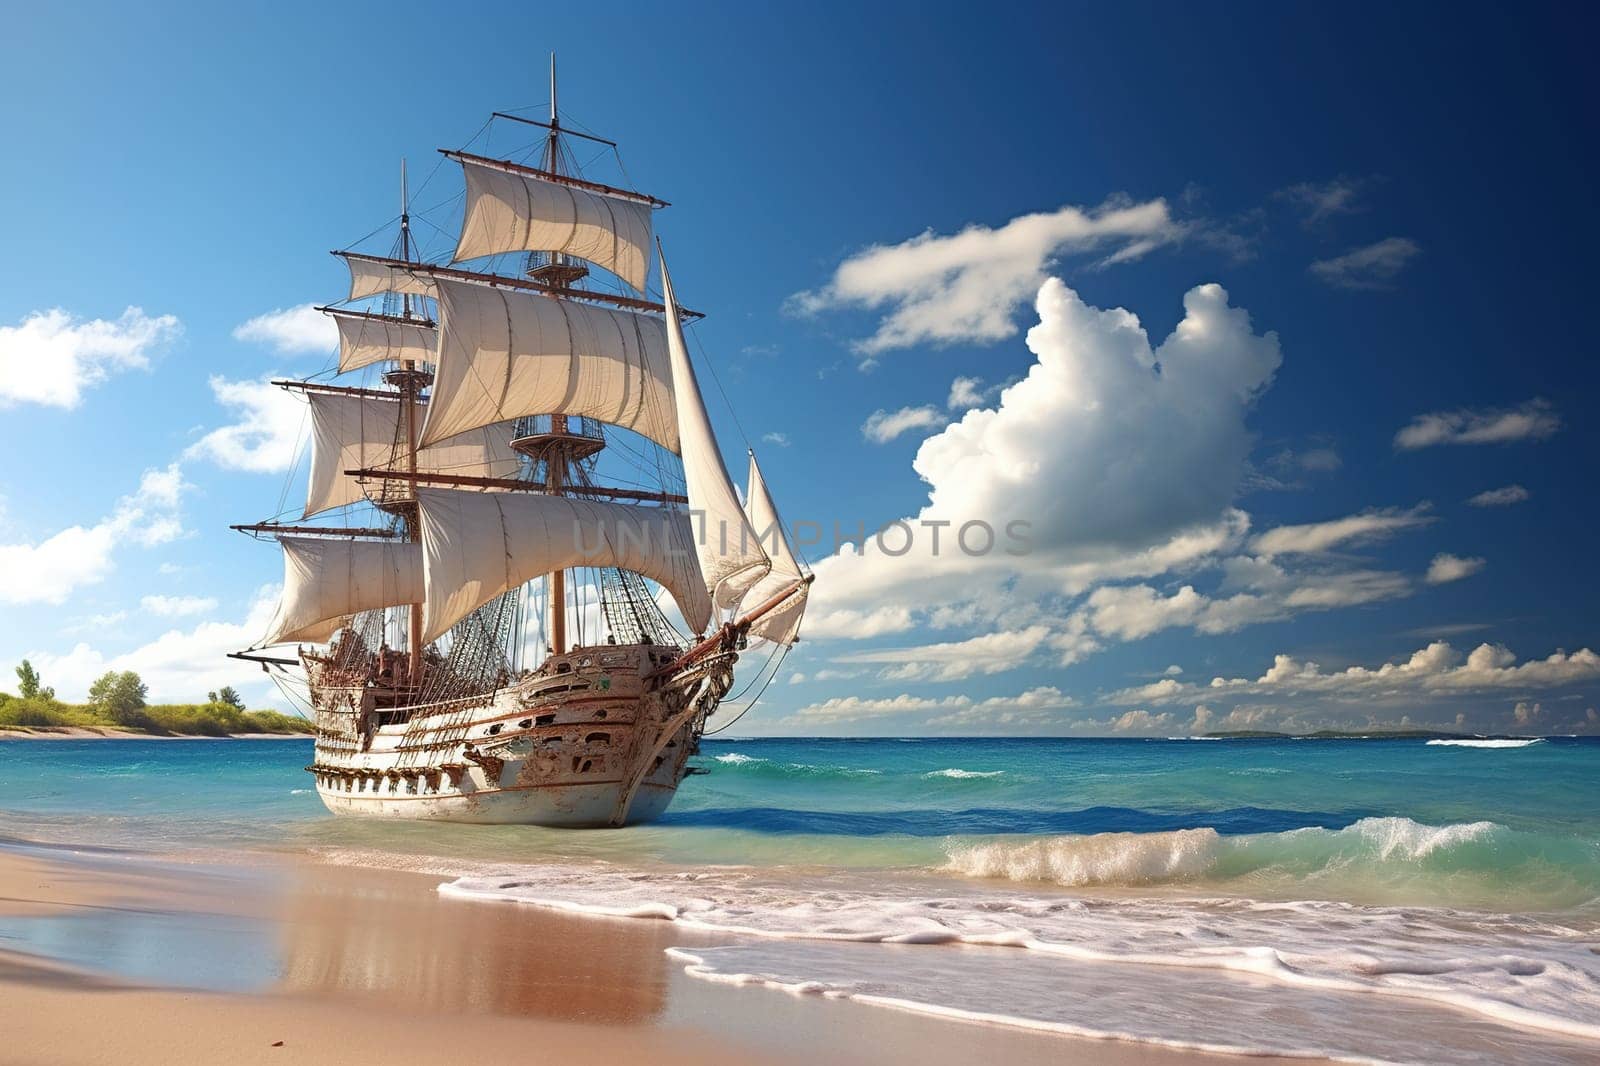 A large wooden ship with white sails off the coast during the day. Generated by artificial intelligence by Vovmar